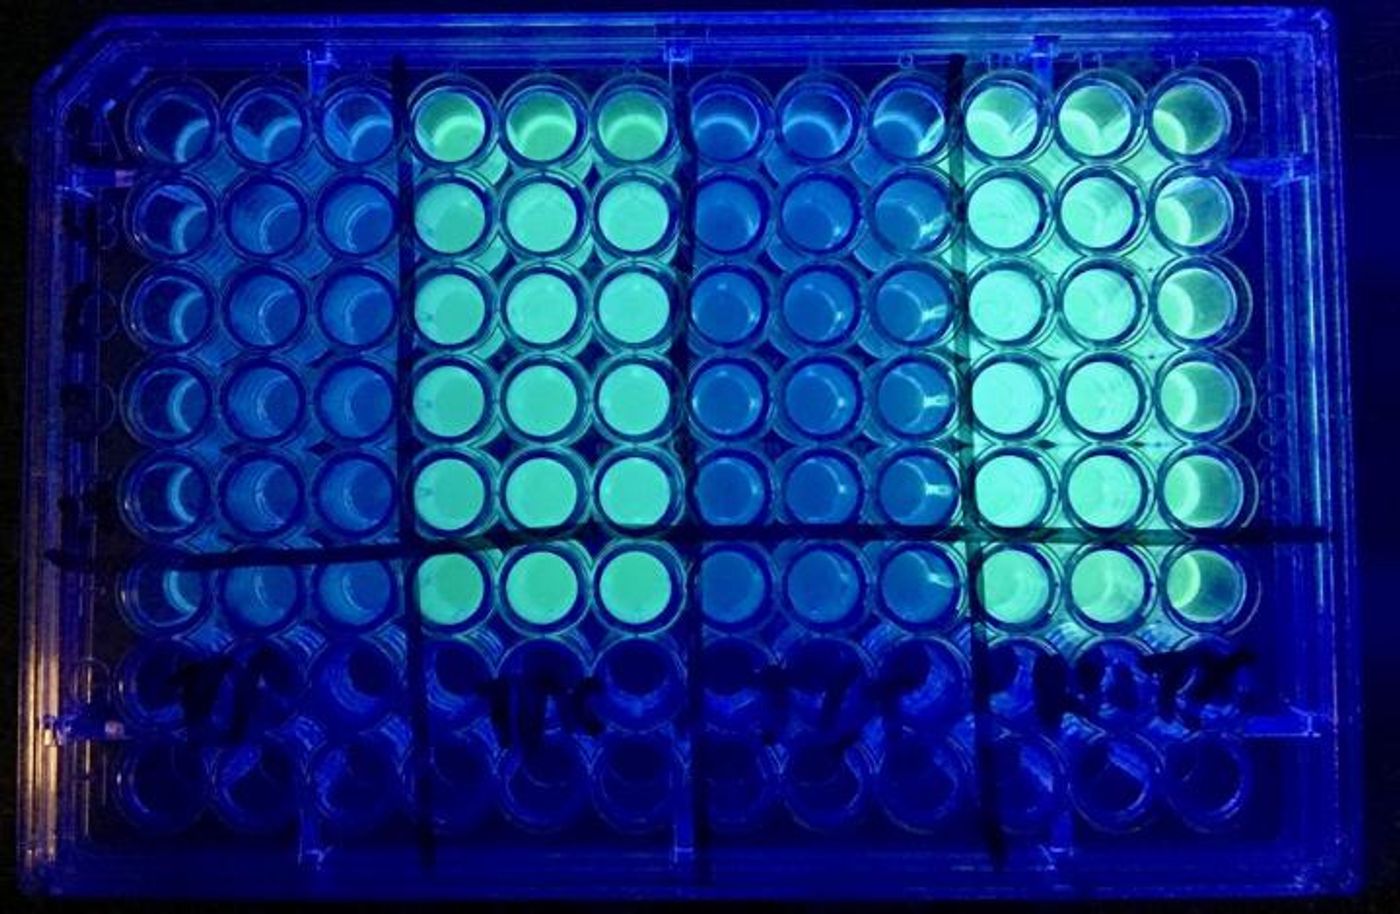 This is a comparison of the cystic fibrosis bacteria, which becomes a green color under fluorescent light, shown before and after treatment. Far right column -- untreated bacteria. Second column -- bacteria treated with tobramycin alone showing some of the bacteria still remaining. Third column -- bacteria treated with triclosan alone showing the majority of the bacteria still remaining. Far left column -- bacteria treated with tobramycin and triclosan showing the effectiveness of the combination treatment. / Credit: Michigan State University